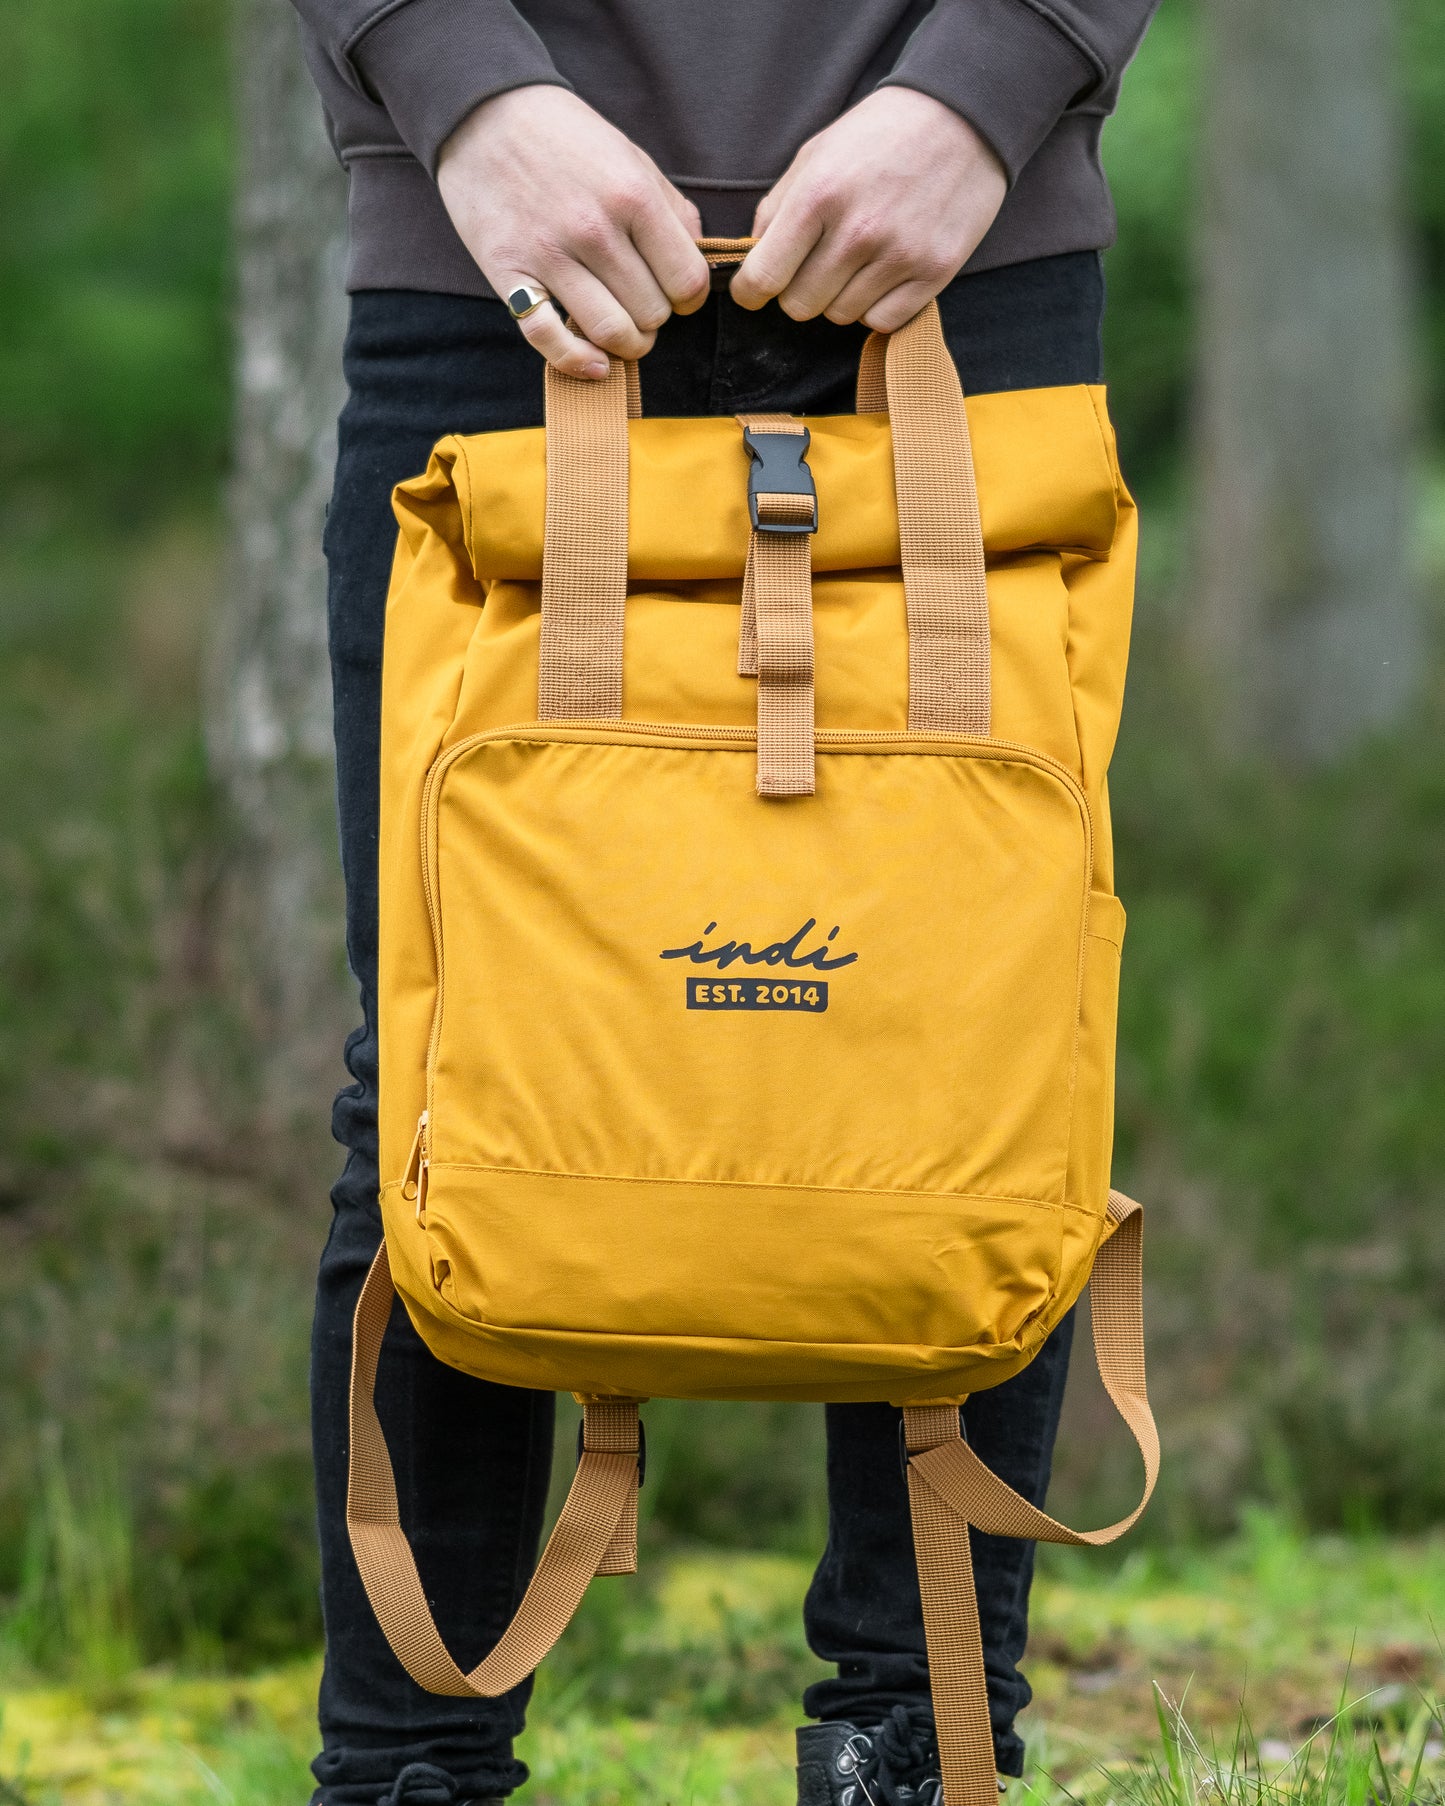 Roll-Top Backpack with Handles in Muted Mustard